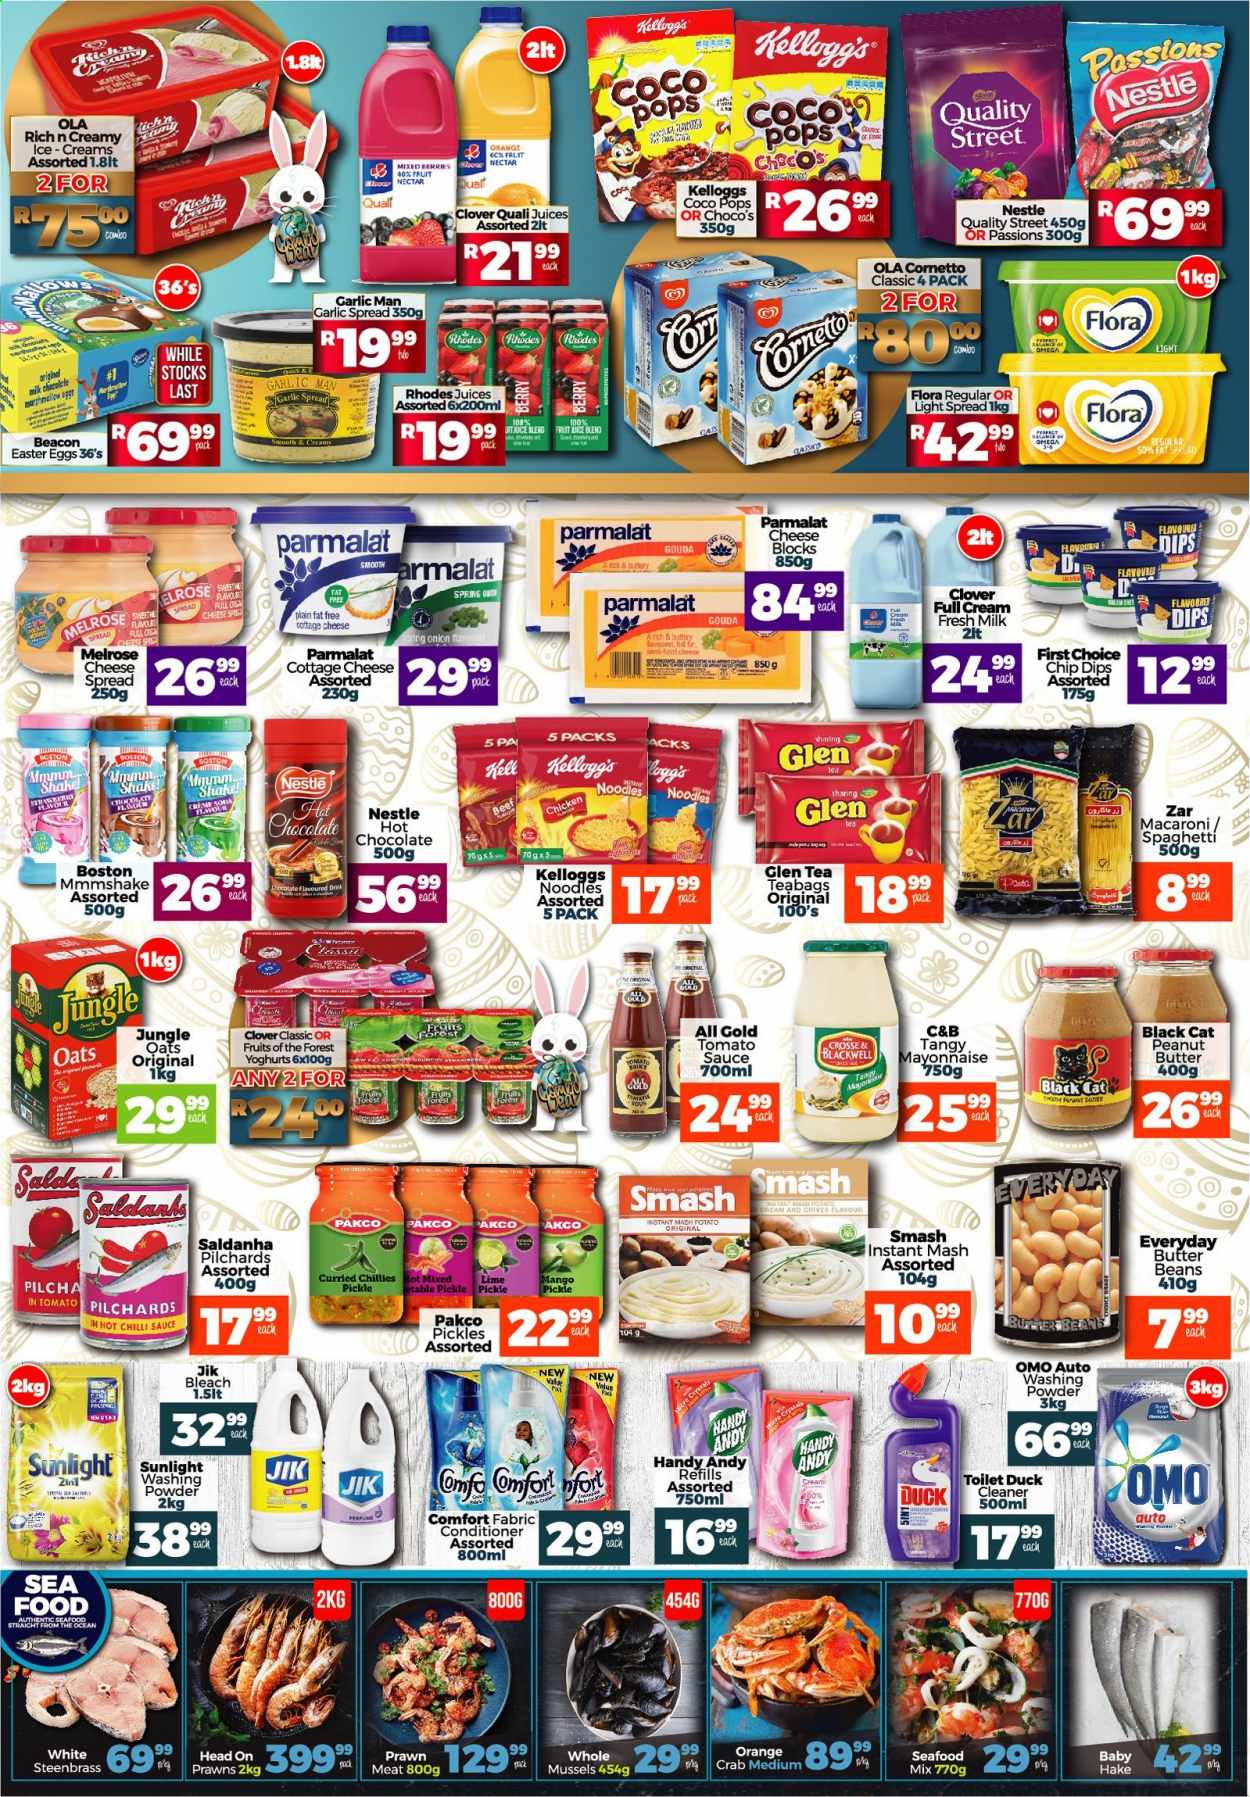 Take n Pay specials - 03.30.2021 - 04.04.2021. 